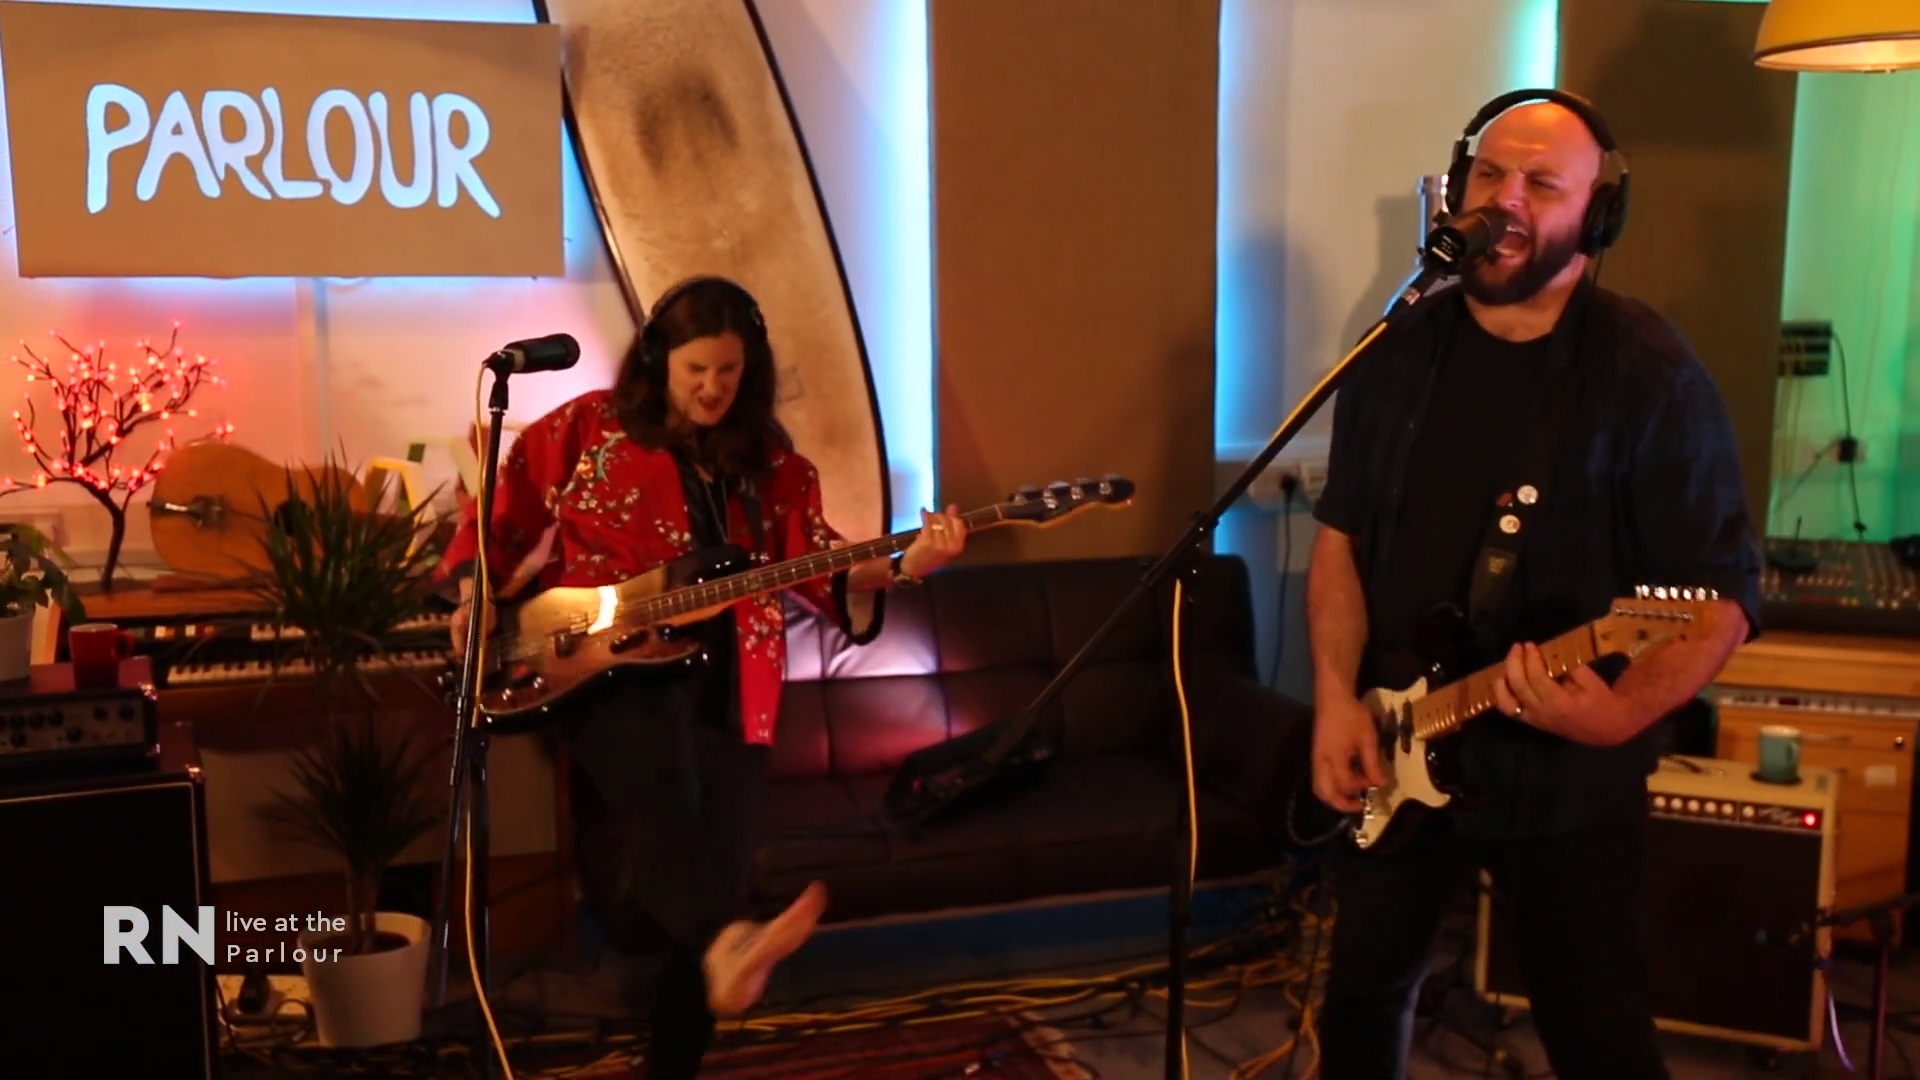 Amber Lights bright, bold take on folk music made this live session a magical one